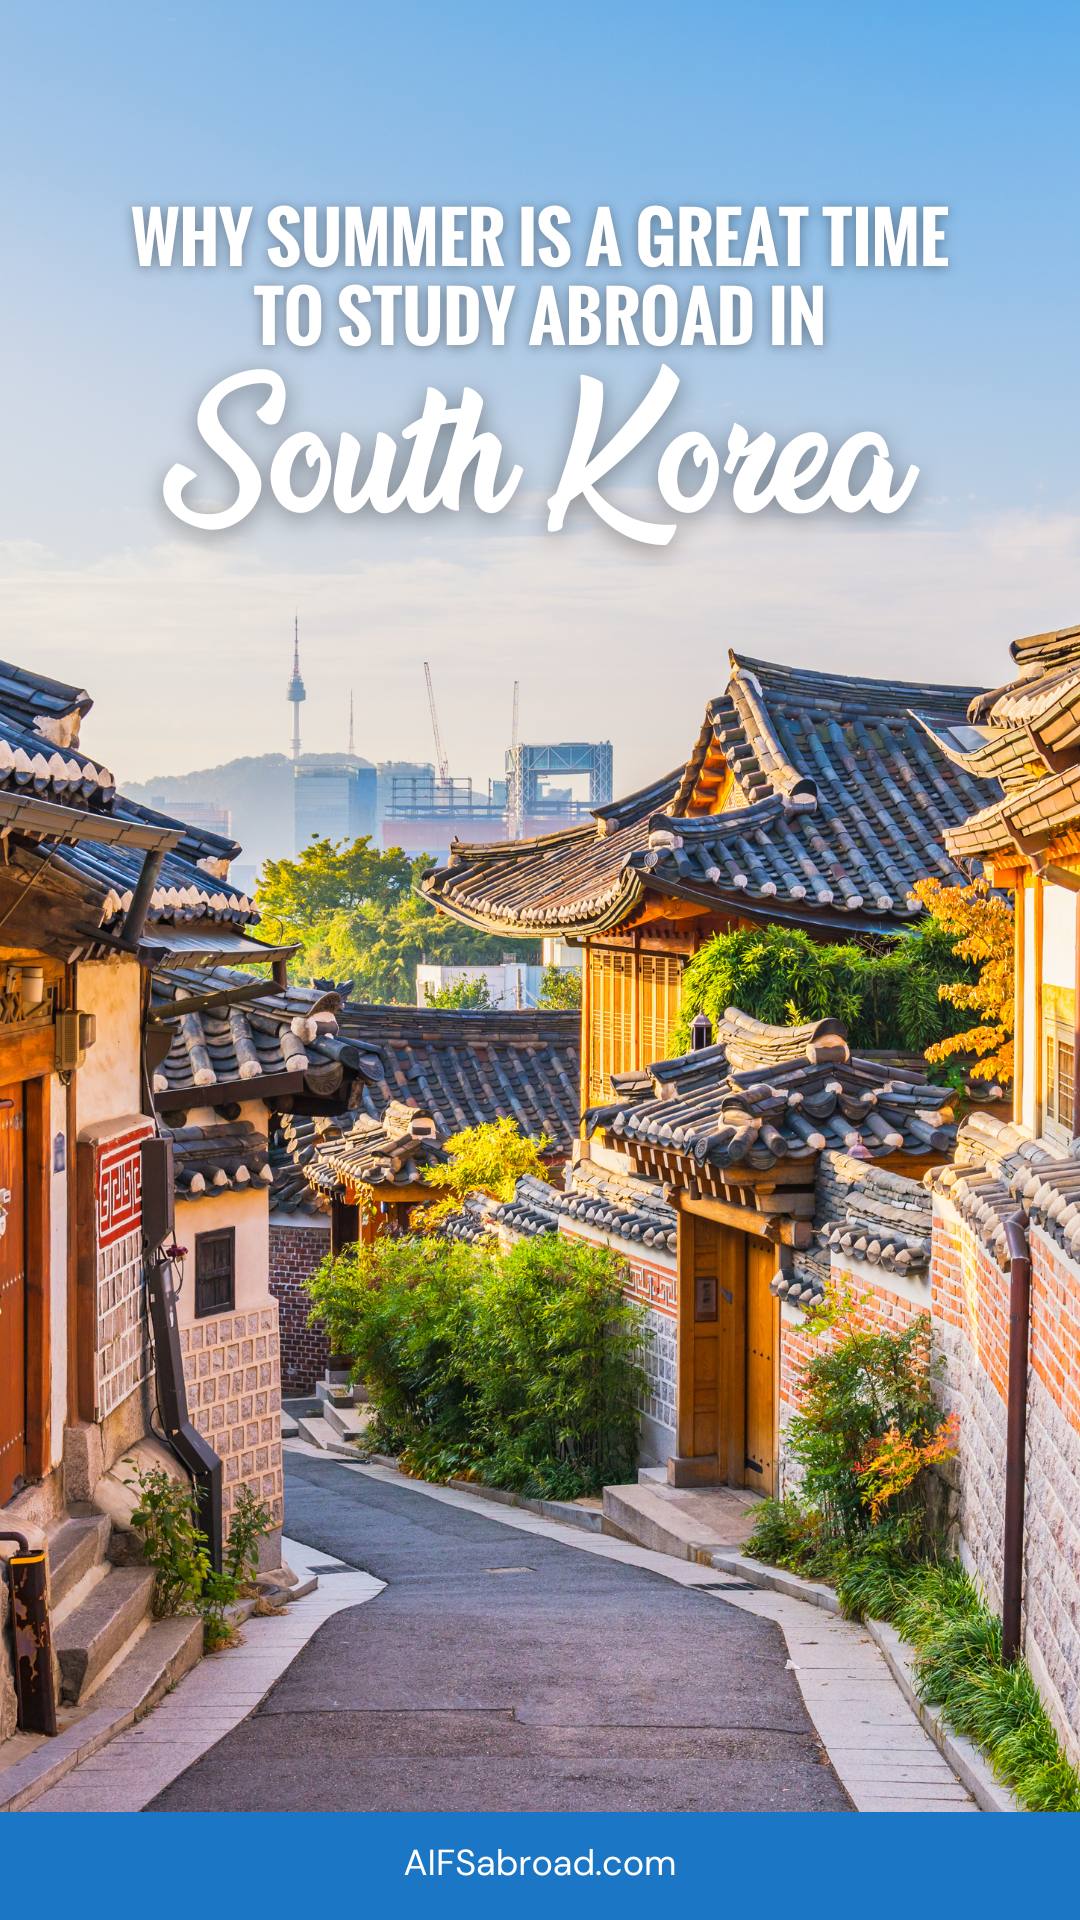 Pin image: Seoul in summer months with text overlay saying "why summer is a great time to study abroad in South Korea"